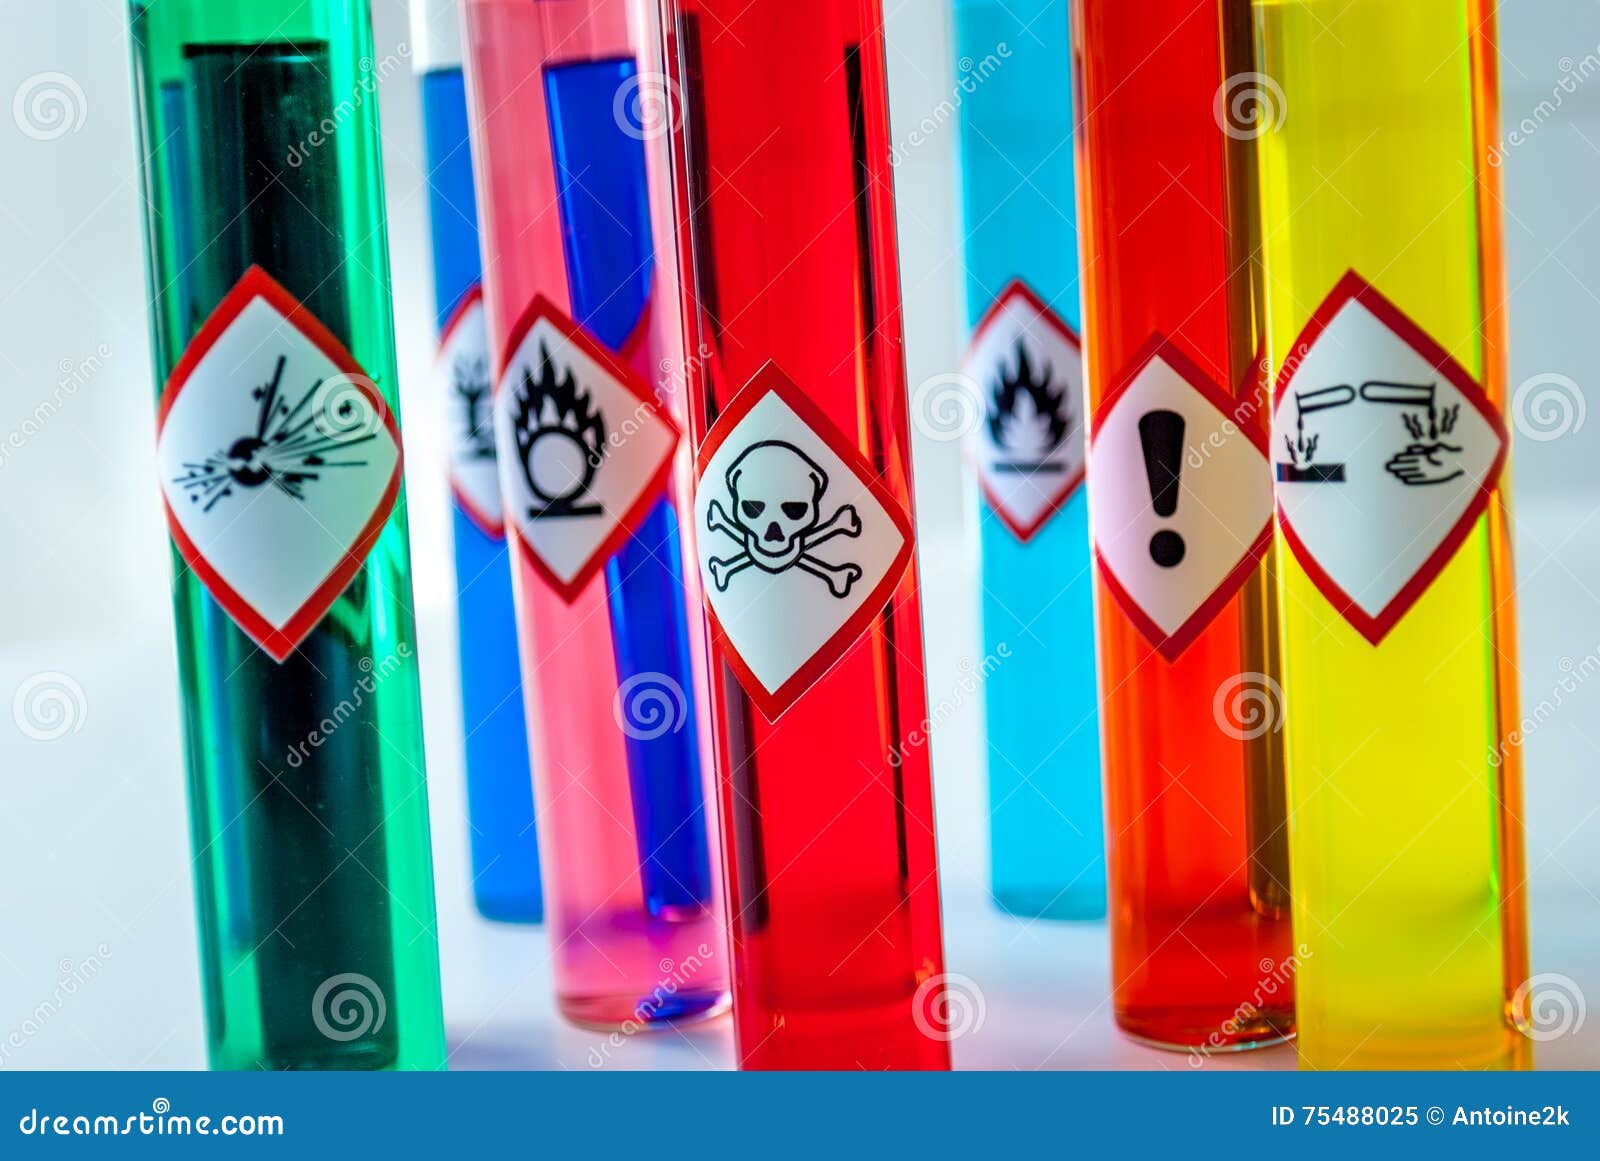 chemical toxic pictogram